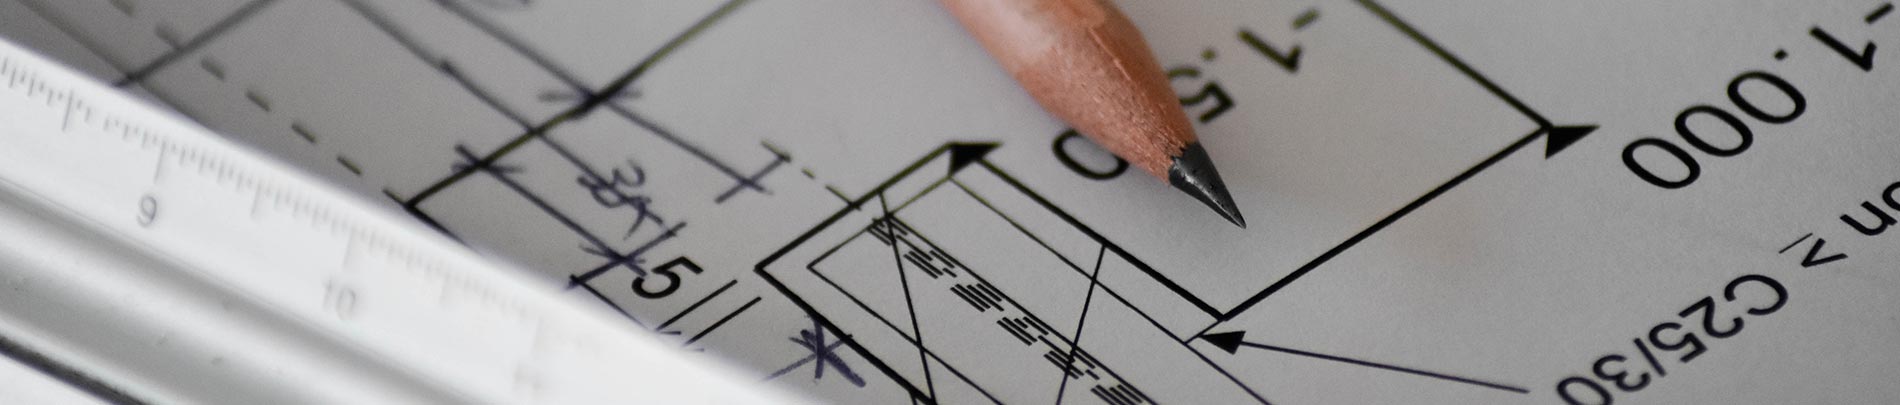 Close up of a pencil and ruler sitting on some building plans.